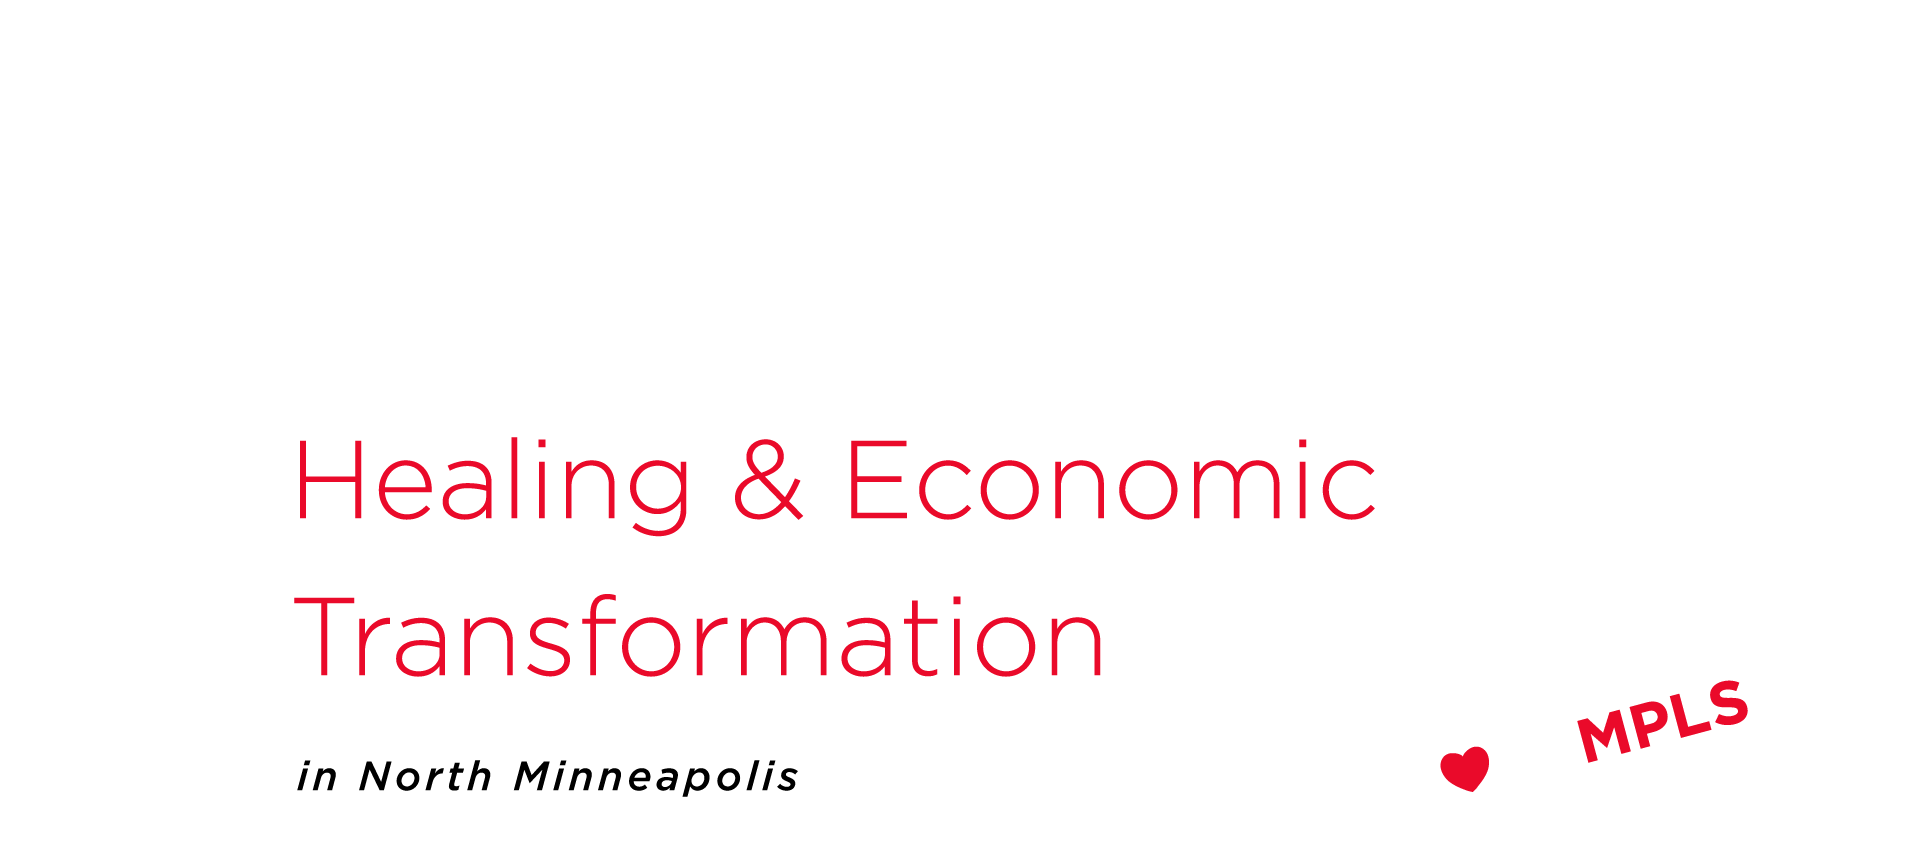 Healing and Economic Transformation in North Minneapolis